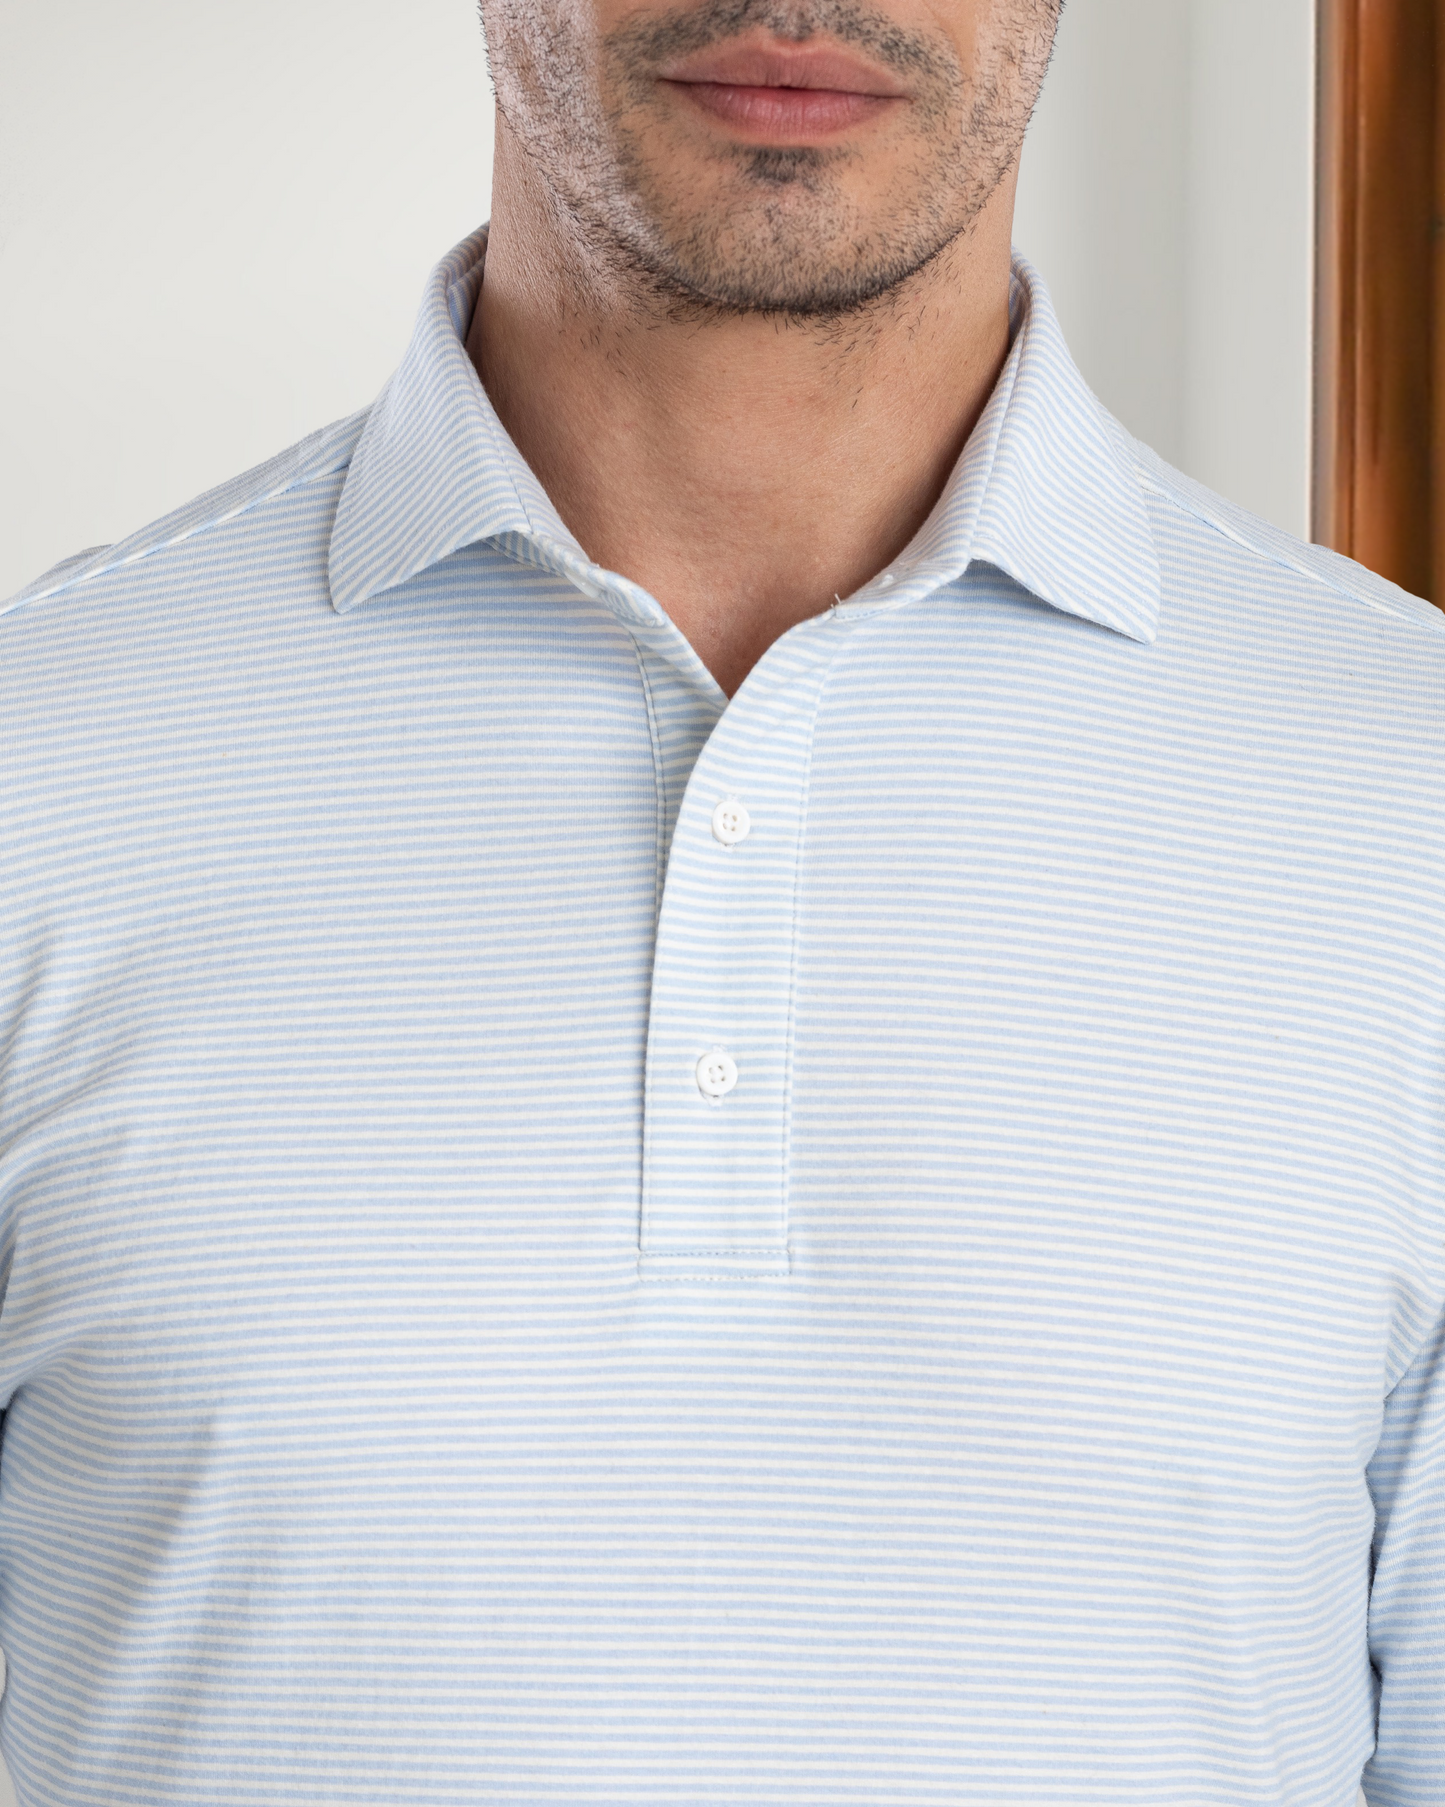 Model wearing the custom oxford polo shirt for men by Luxire in white and light blue candy stripes 2